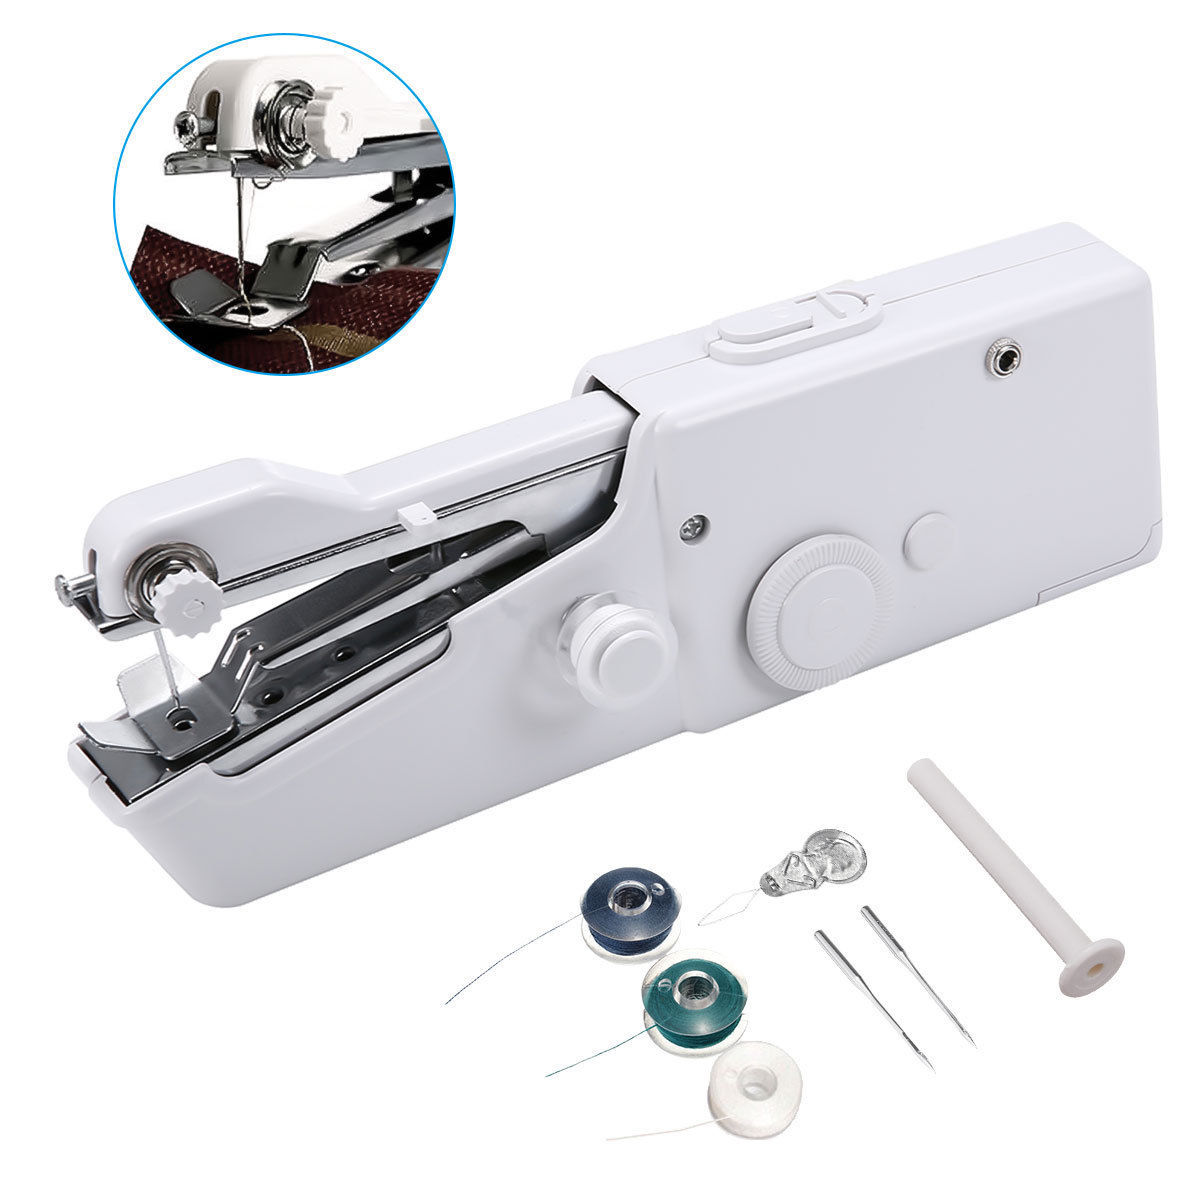 Sewing Machine Portable Handheld Mini Electric Cordless Tailor Stitching Tool